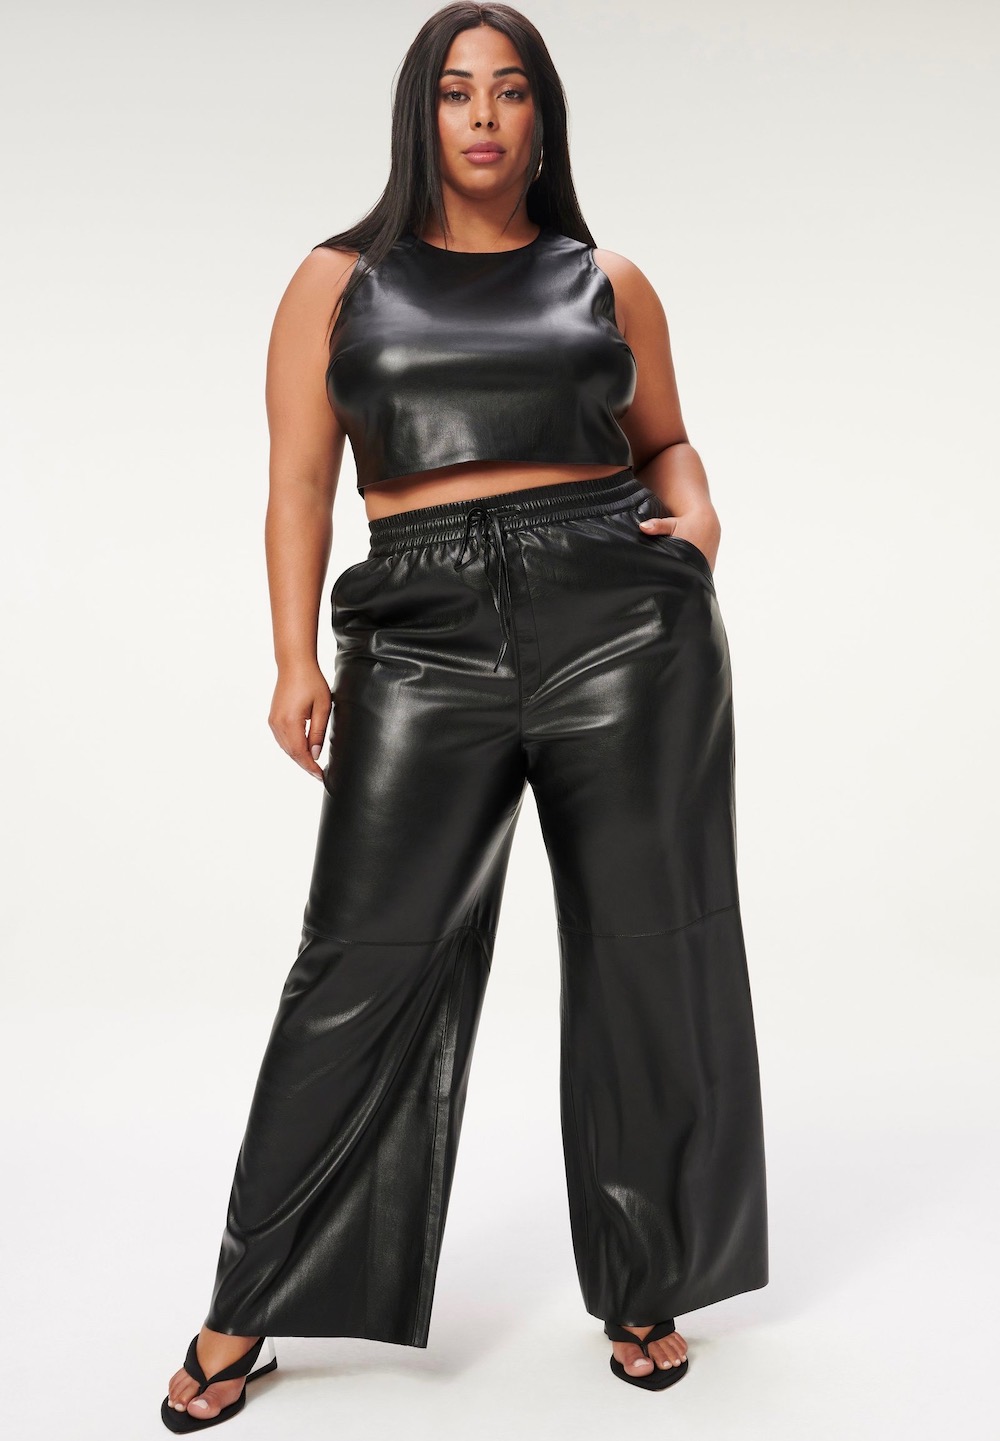 Leather Pants for Every Size and Sense of Style - theFashionSpot